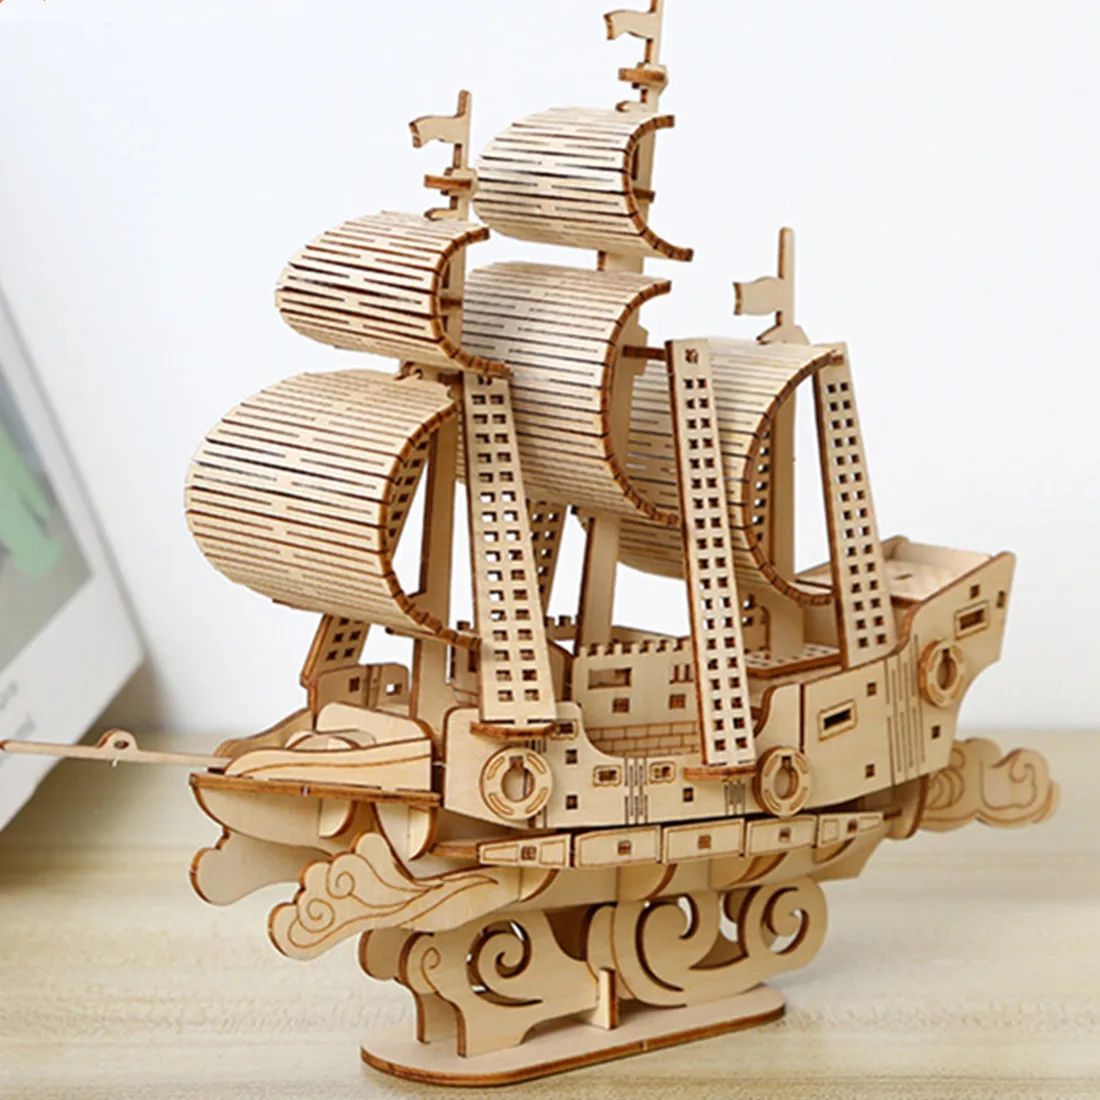 3D Puzzles Wooden Ocean Sailing Model Handmade Boat Building BlockS Kits DIY Assembly Ship Toy for Kids Adults GiftS bburago 1 24 lamborghini essenza scv12 weissach alloy racing car alloy vehicle diecast cars model toy collection gifts adults